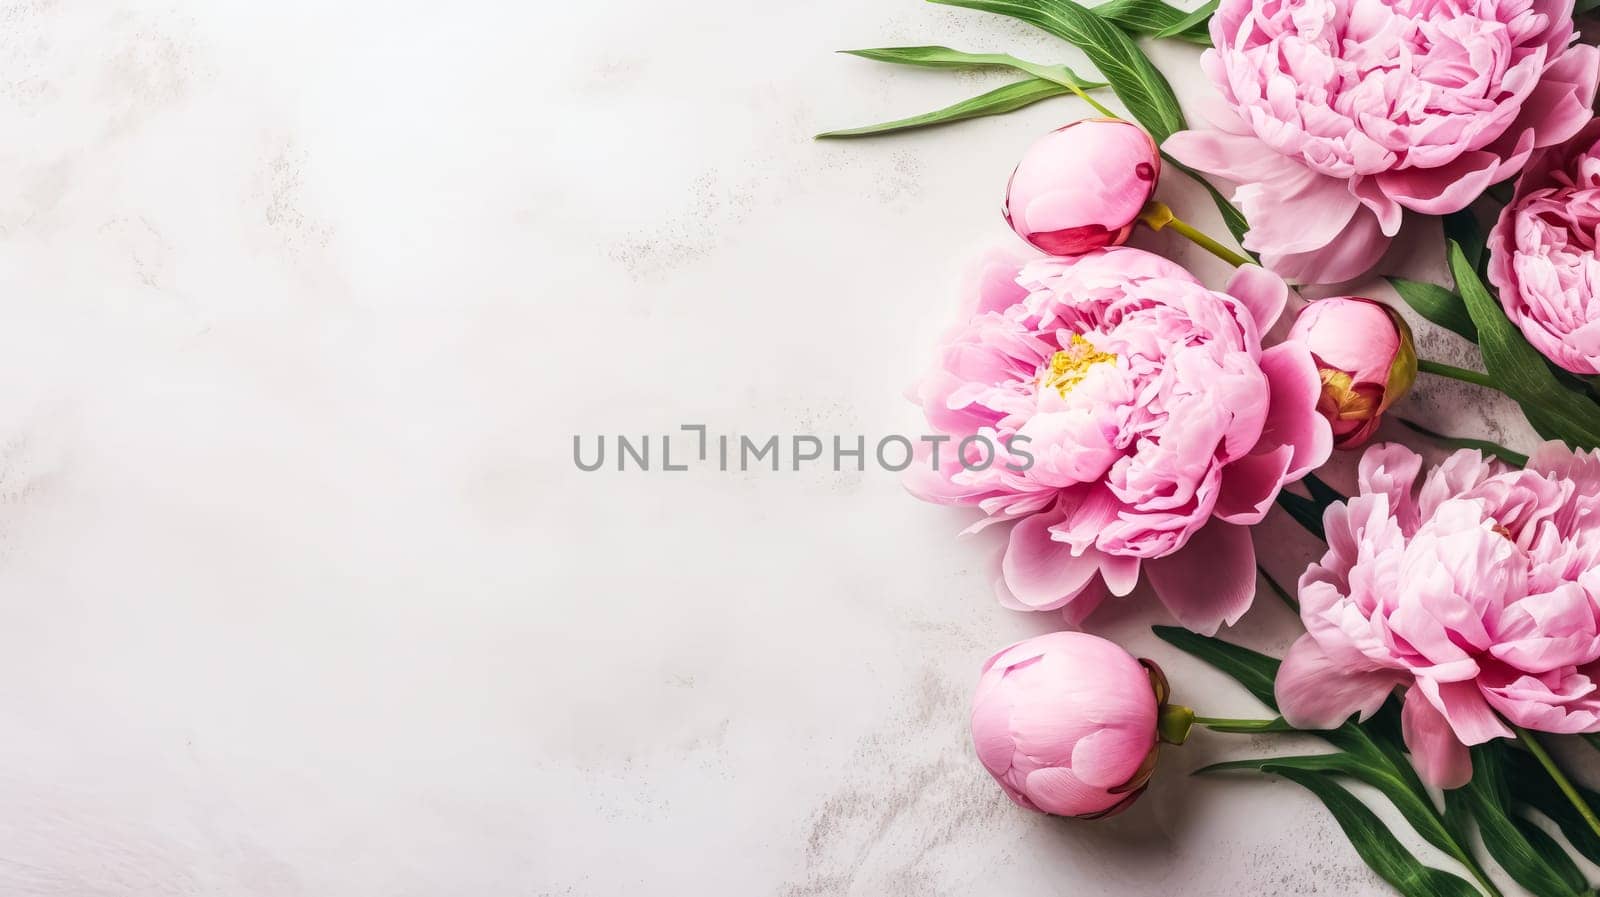 Elegant pink peonies gracefully isolated on a chic gray background by Alla_Morozova93